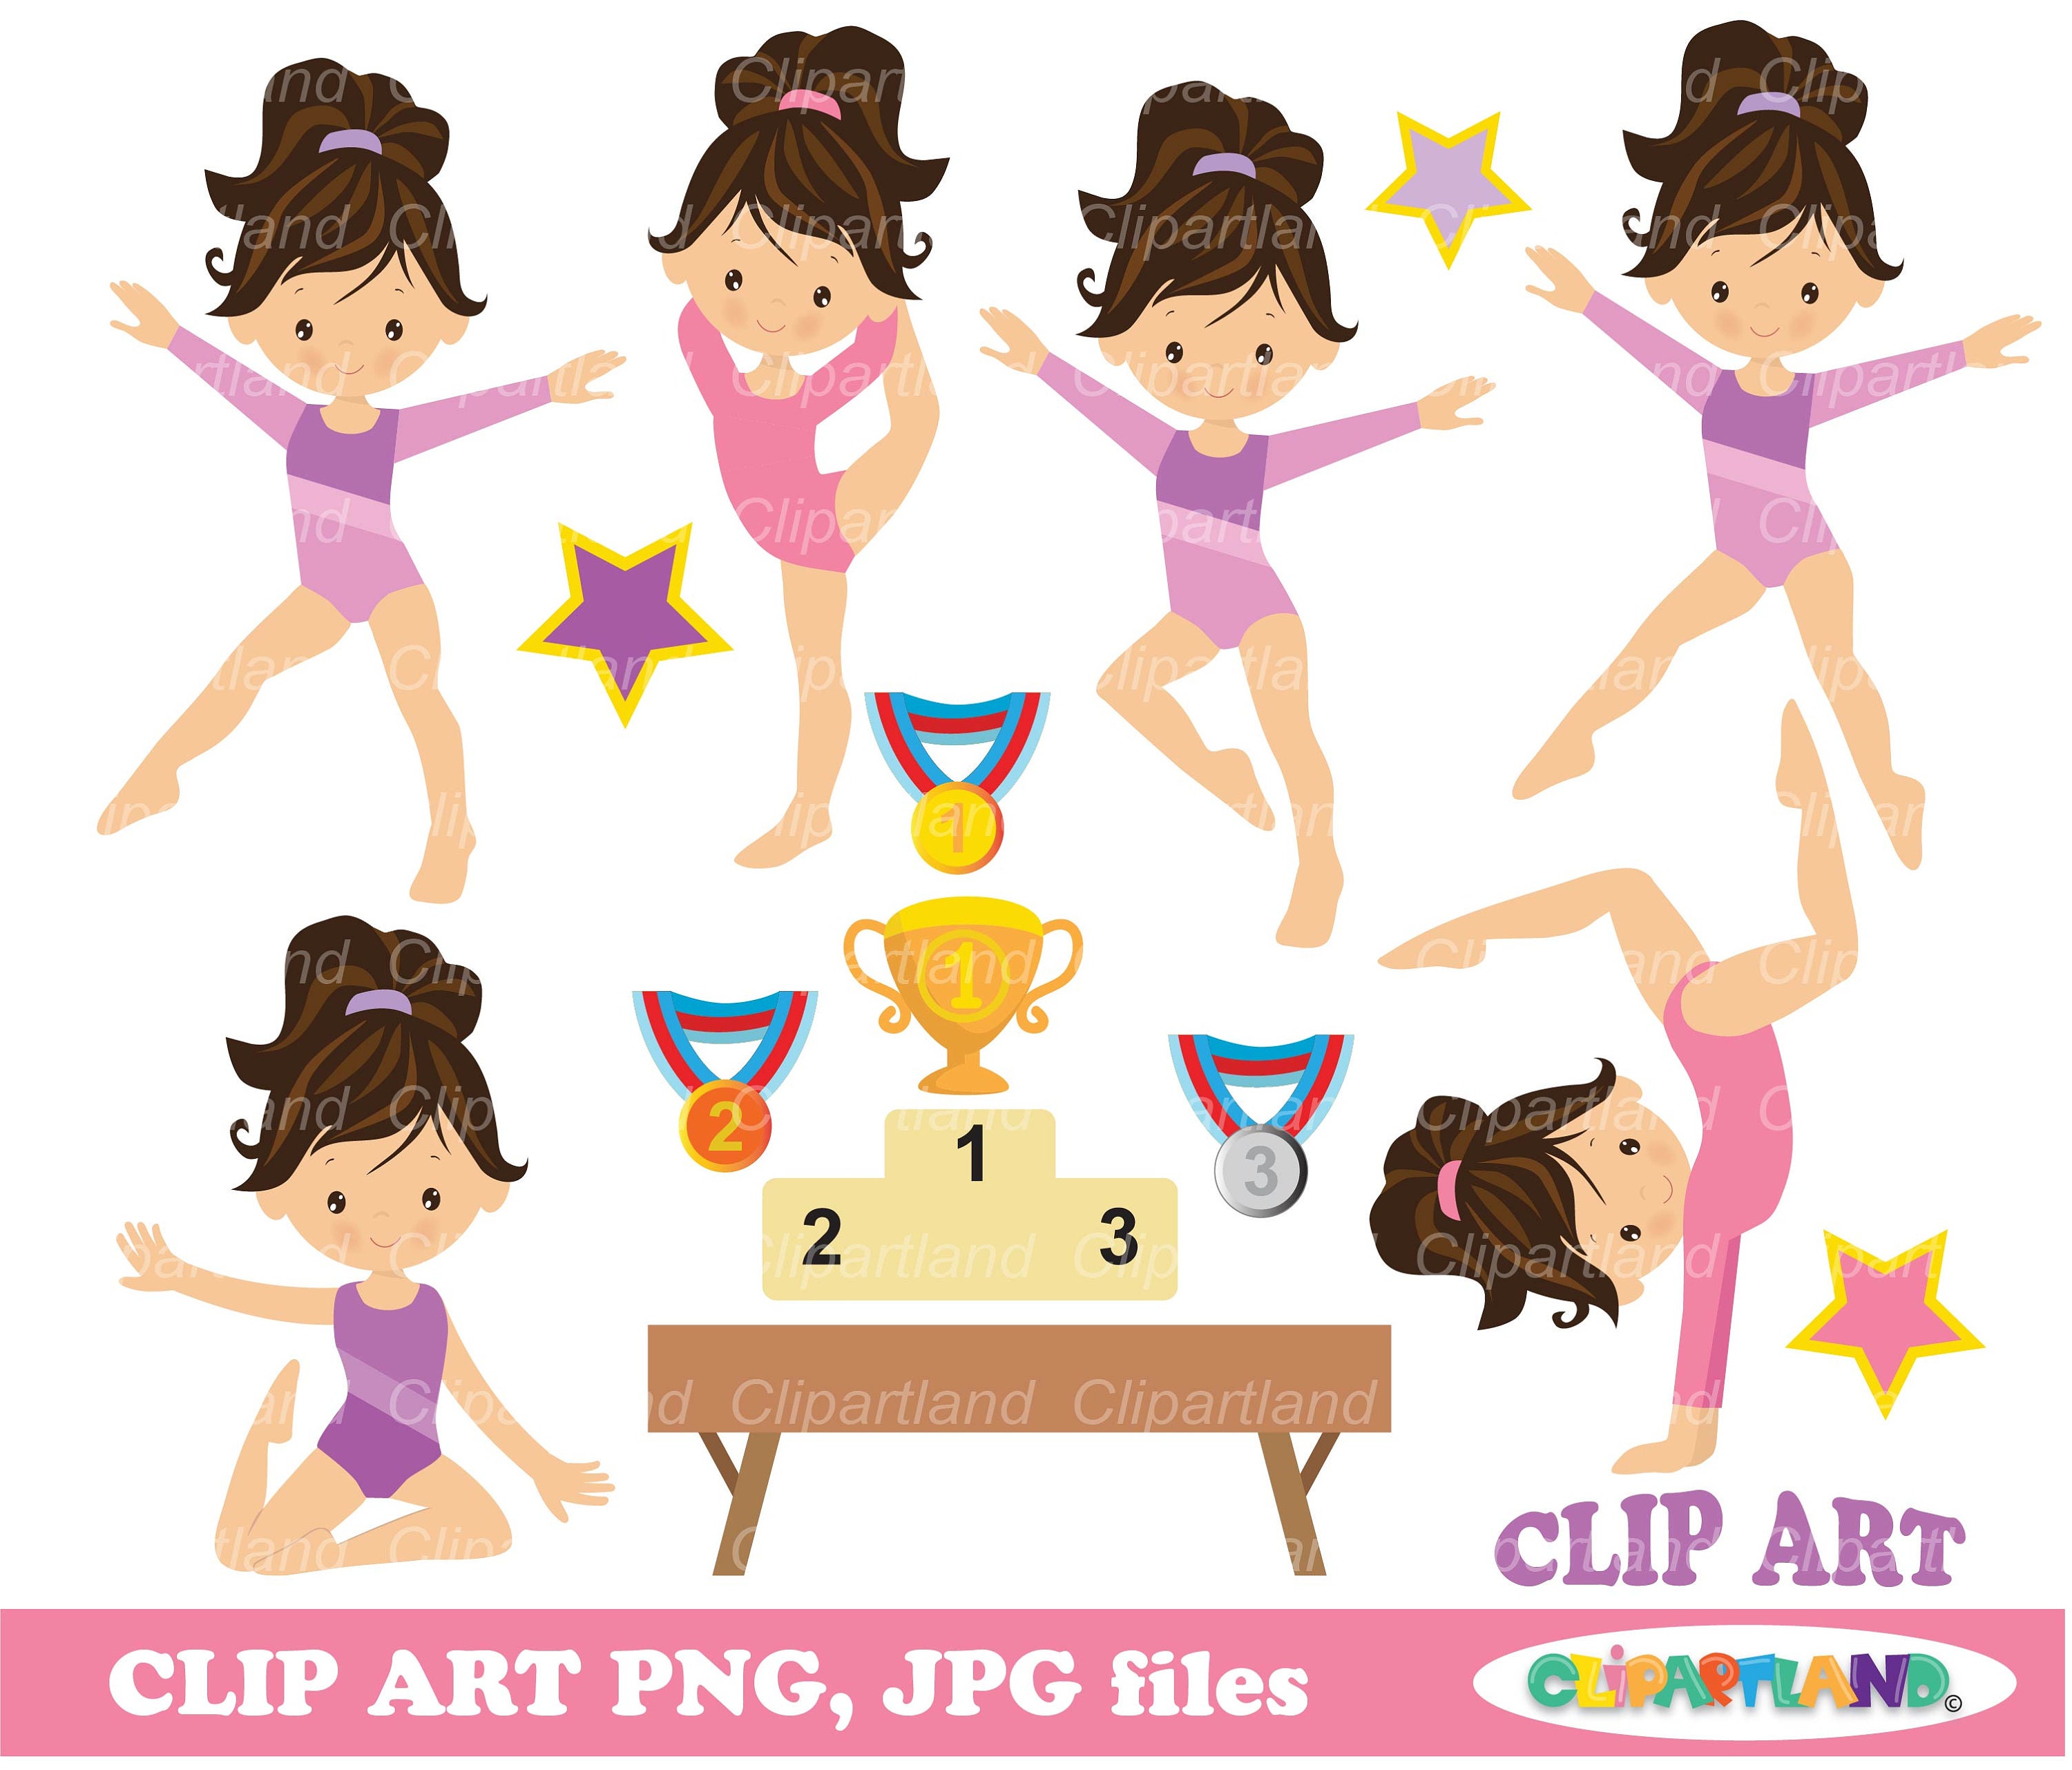 Top 5 Gymnastics Gifts for 6 Year Old Girls 